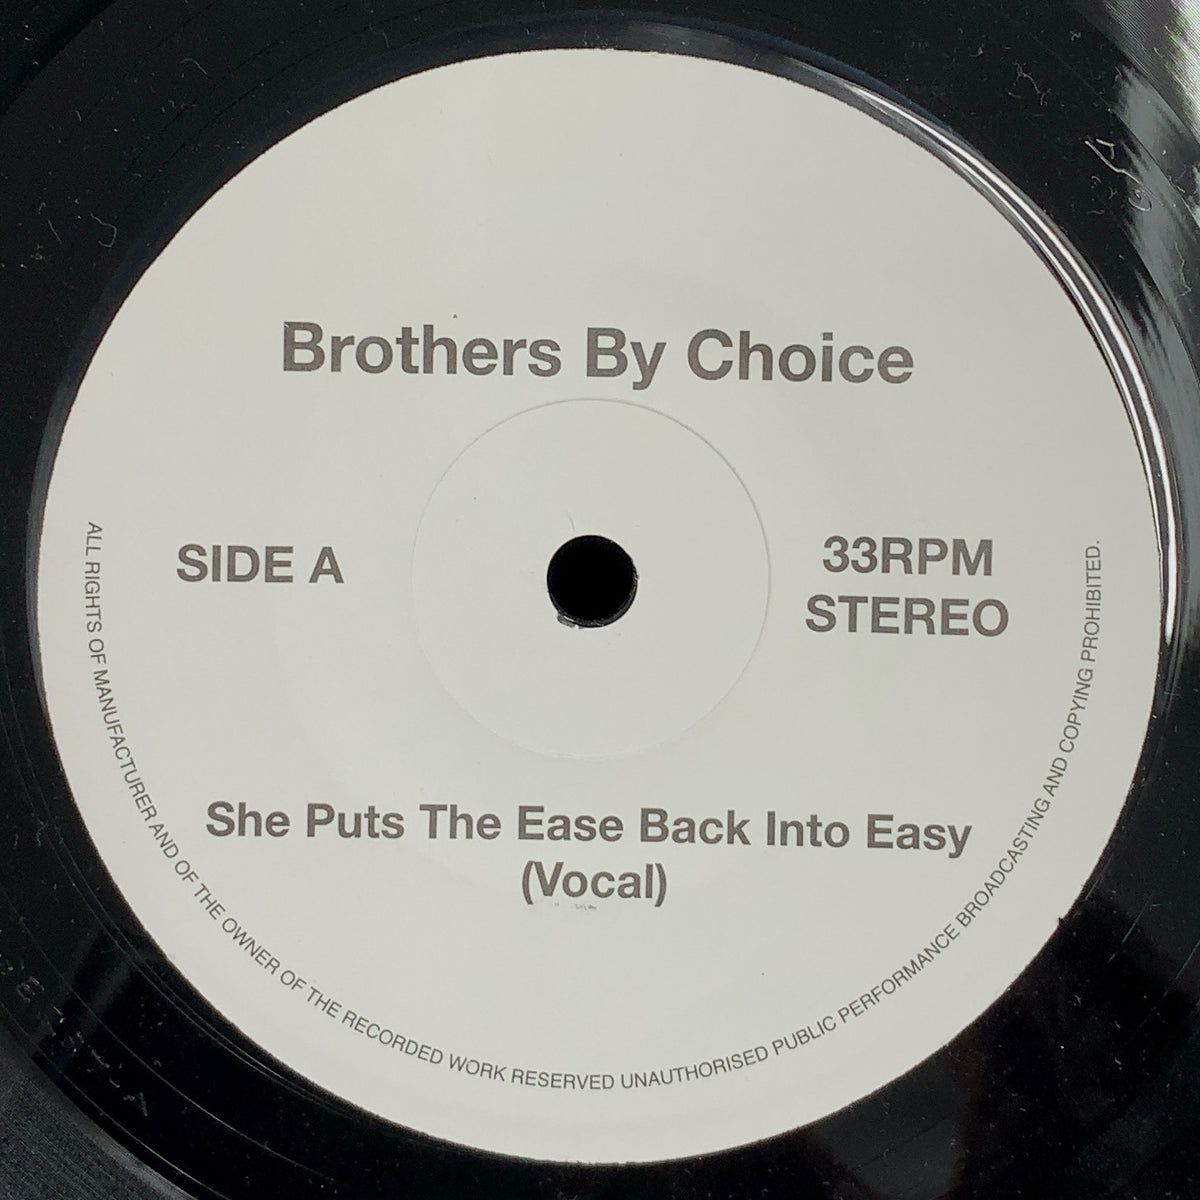 BROTHERS BY CHOICE / SHE PUTS THE EASE BACK INTO EASY – TICRO MARKET